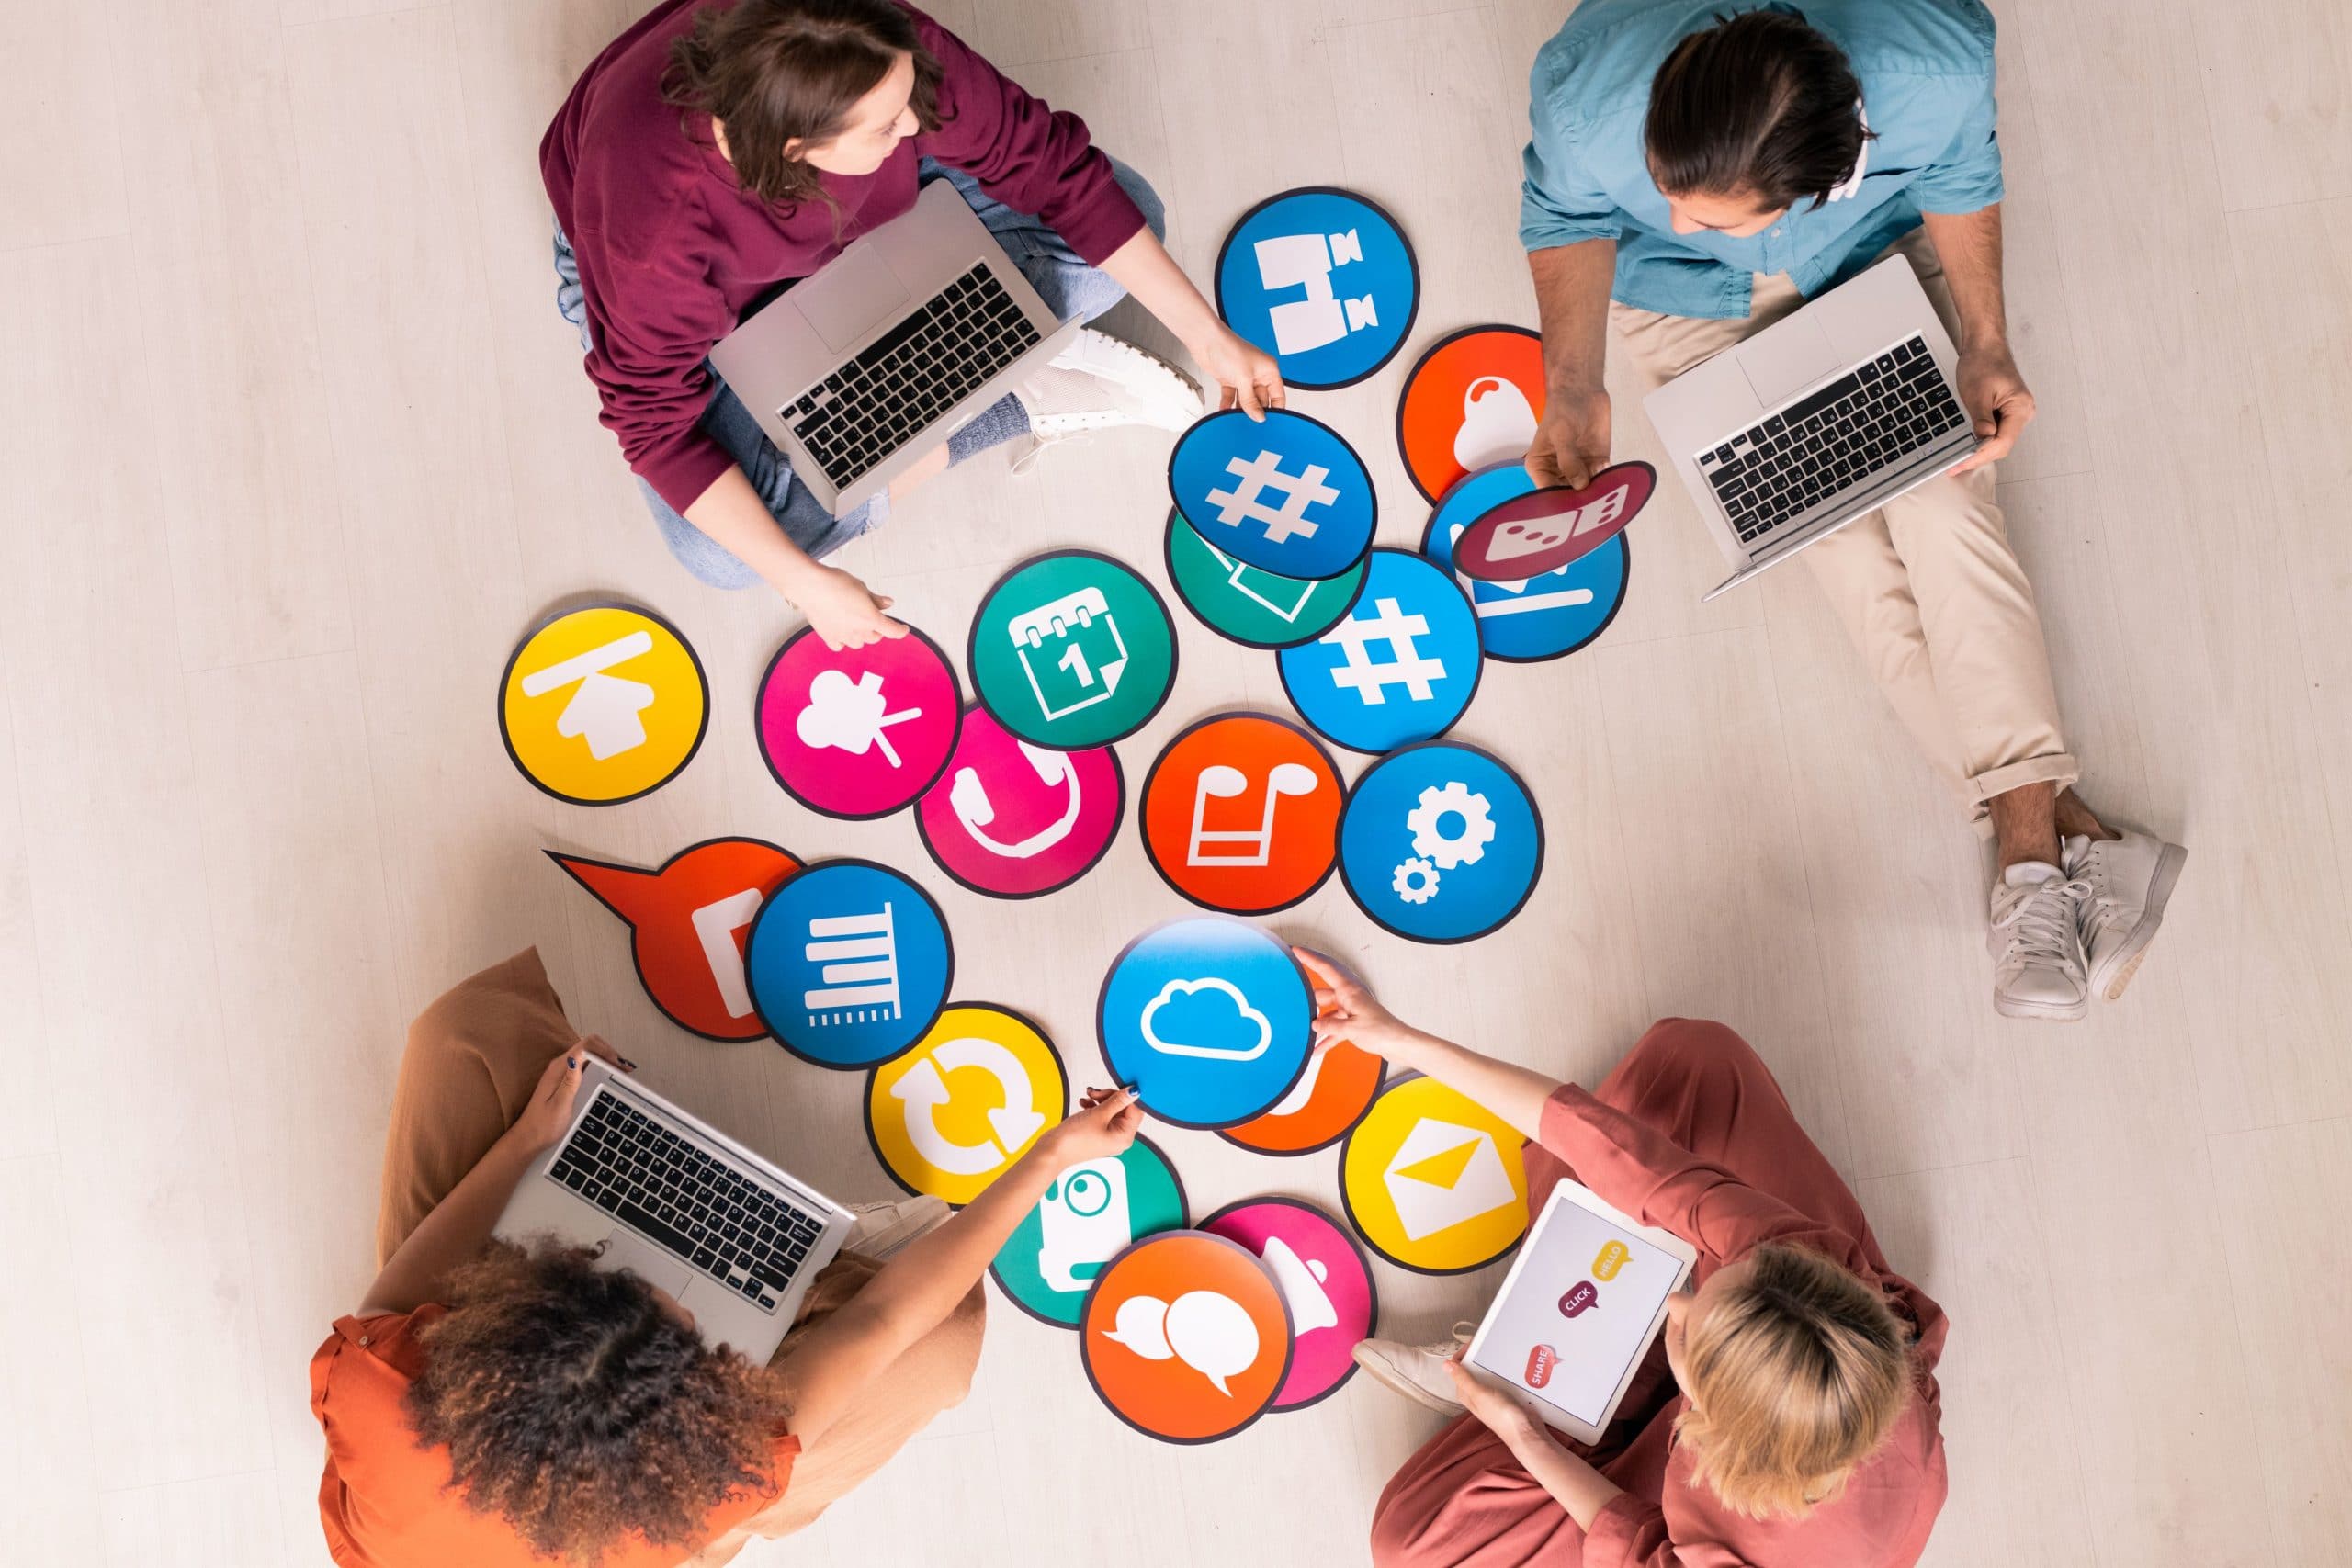 team of people using laptops surrounded by icons refer to internet marketing tools